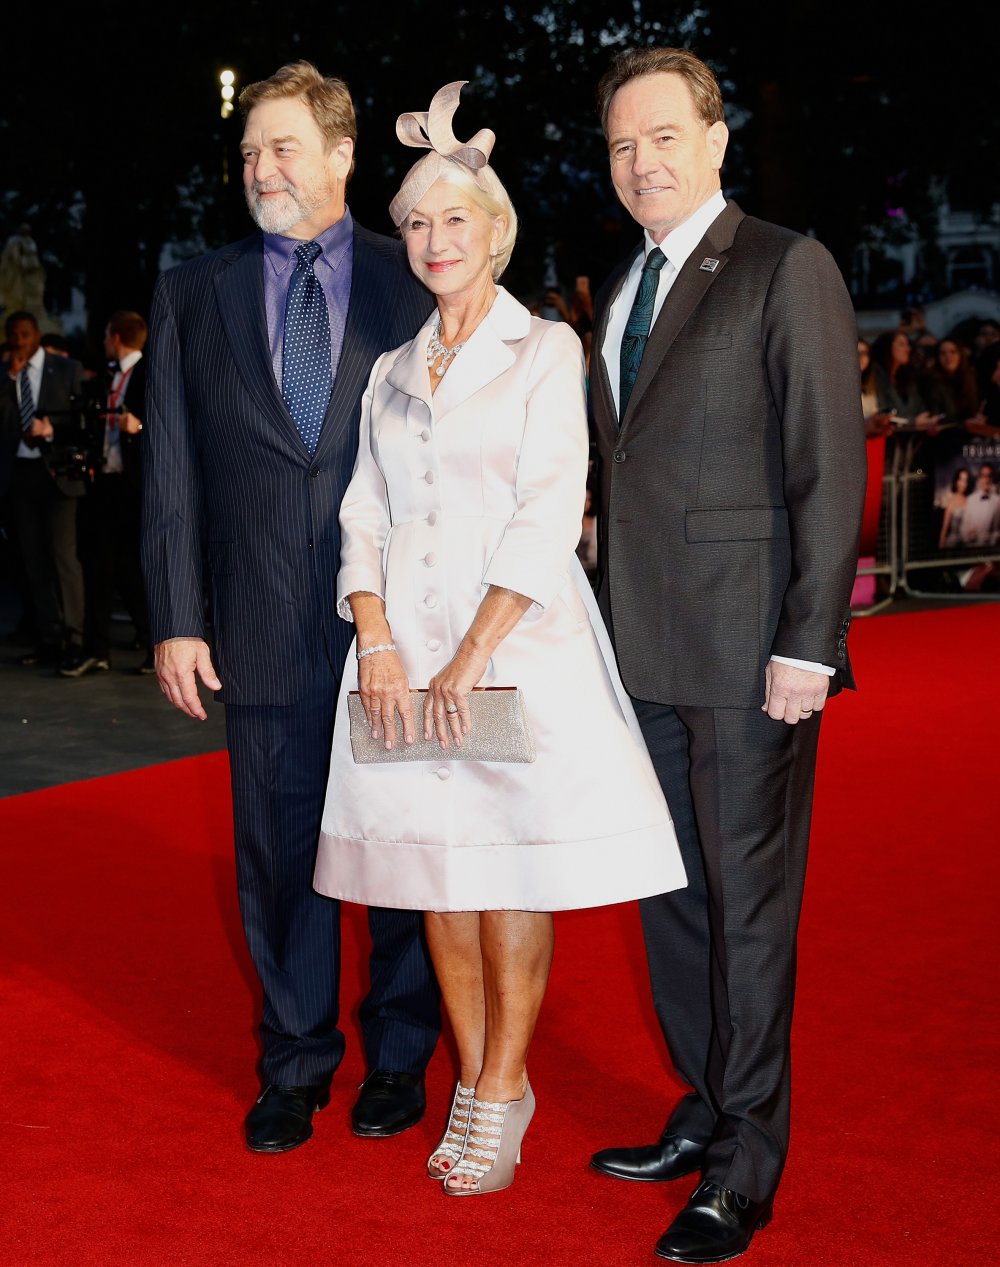 Actors John Goodman, Helen Mirren and Bryan Cranston attend the Trumbo premiere during the BFI London Film Festival at the Odeon Leicester Square